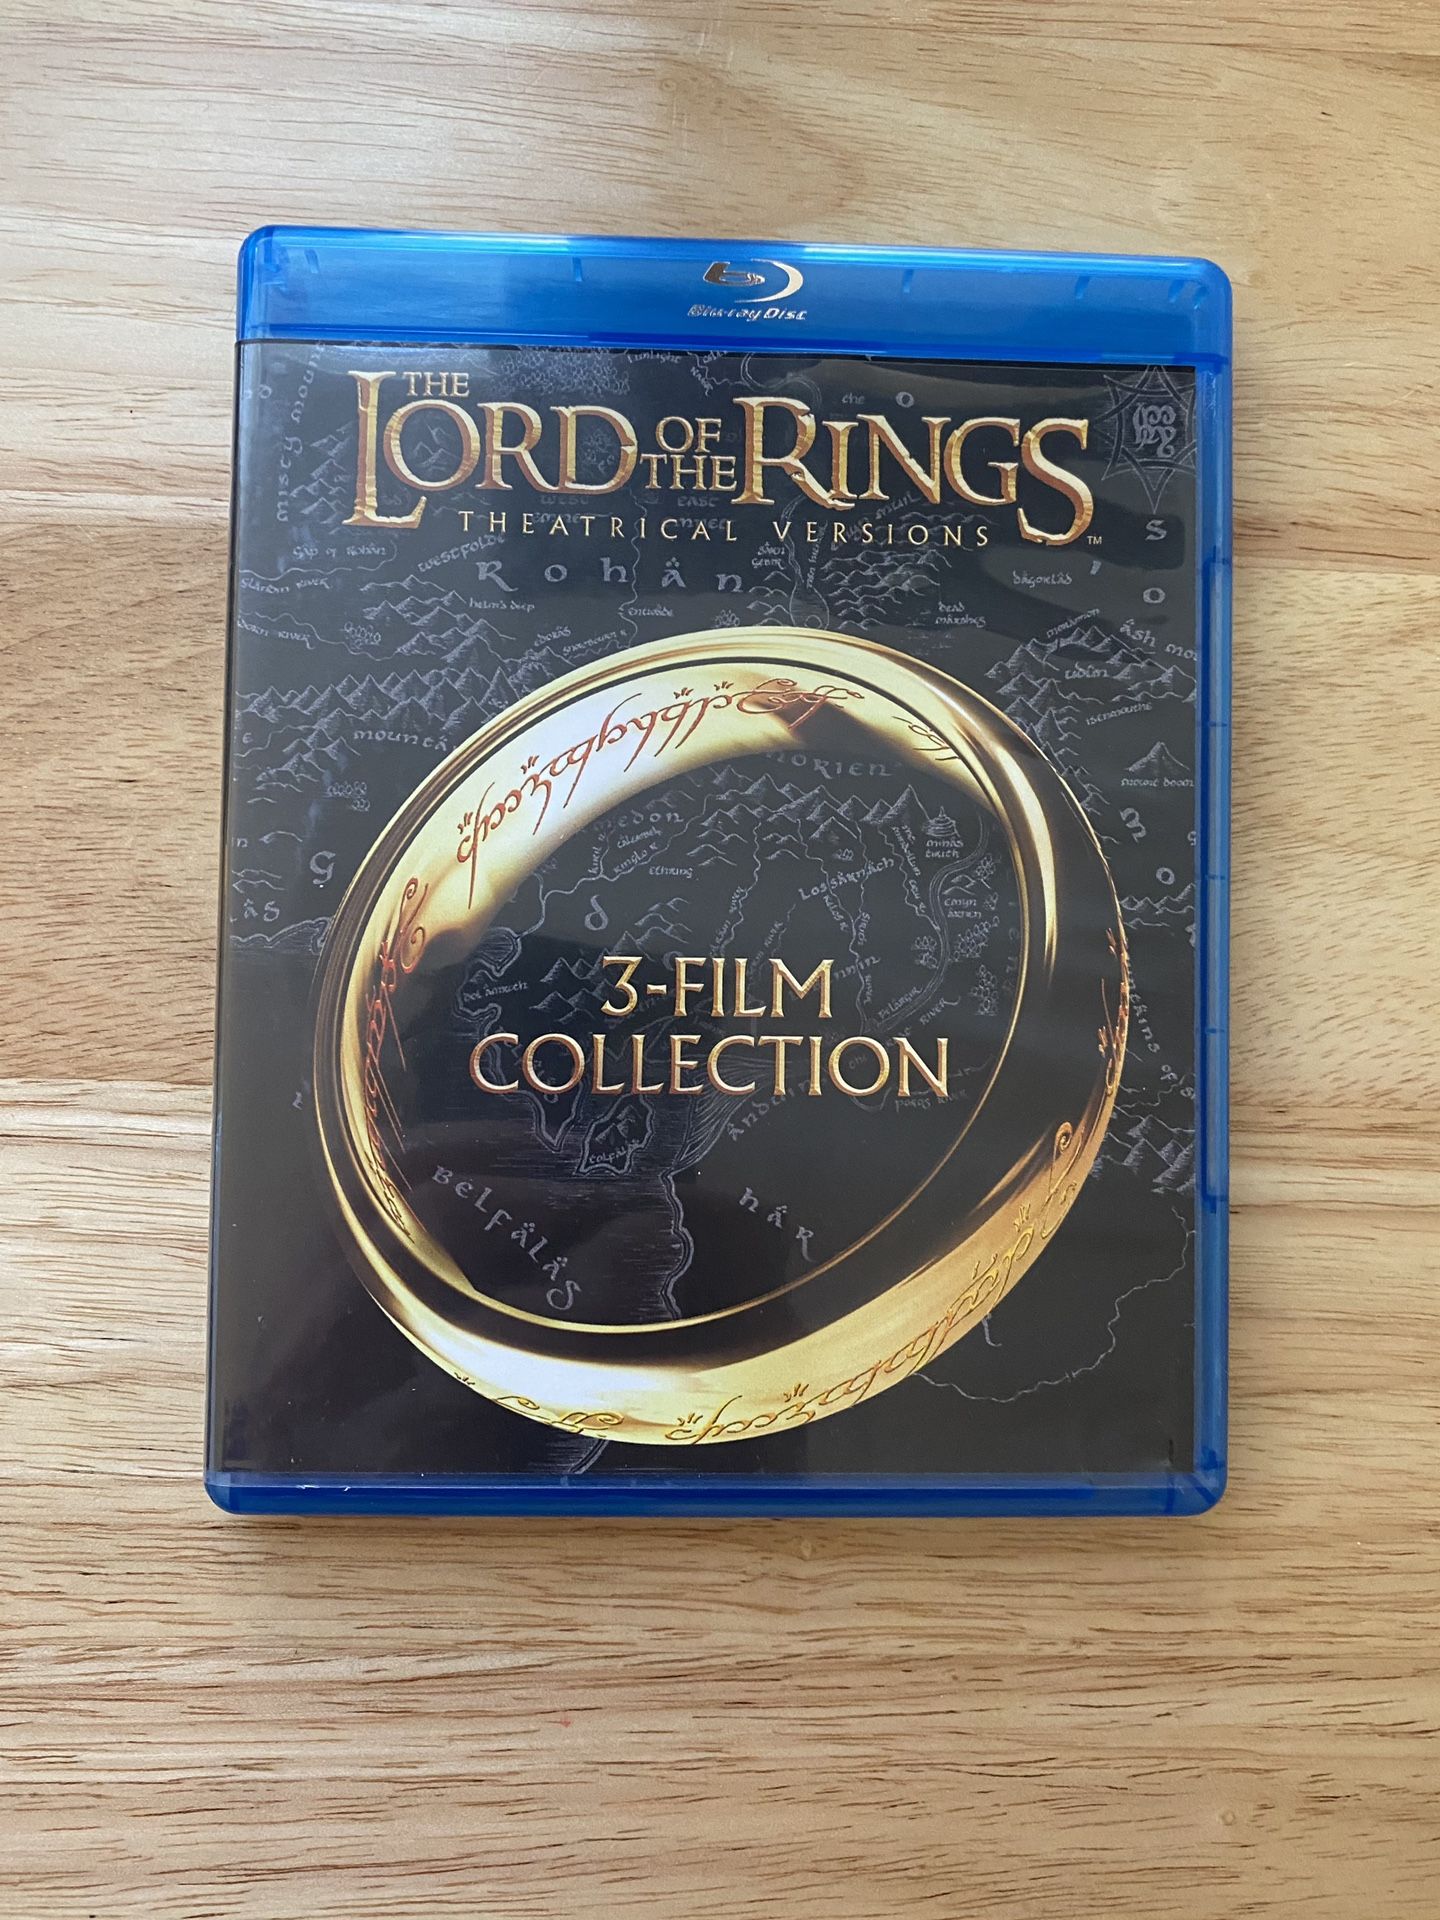 Lord Of The Rings Blue Ray Box Set